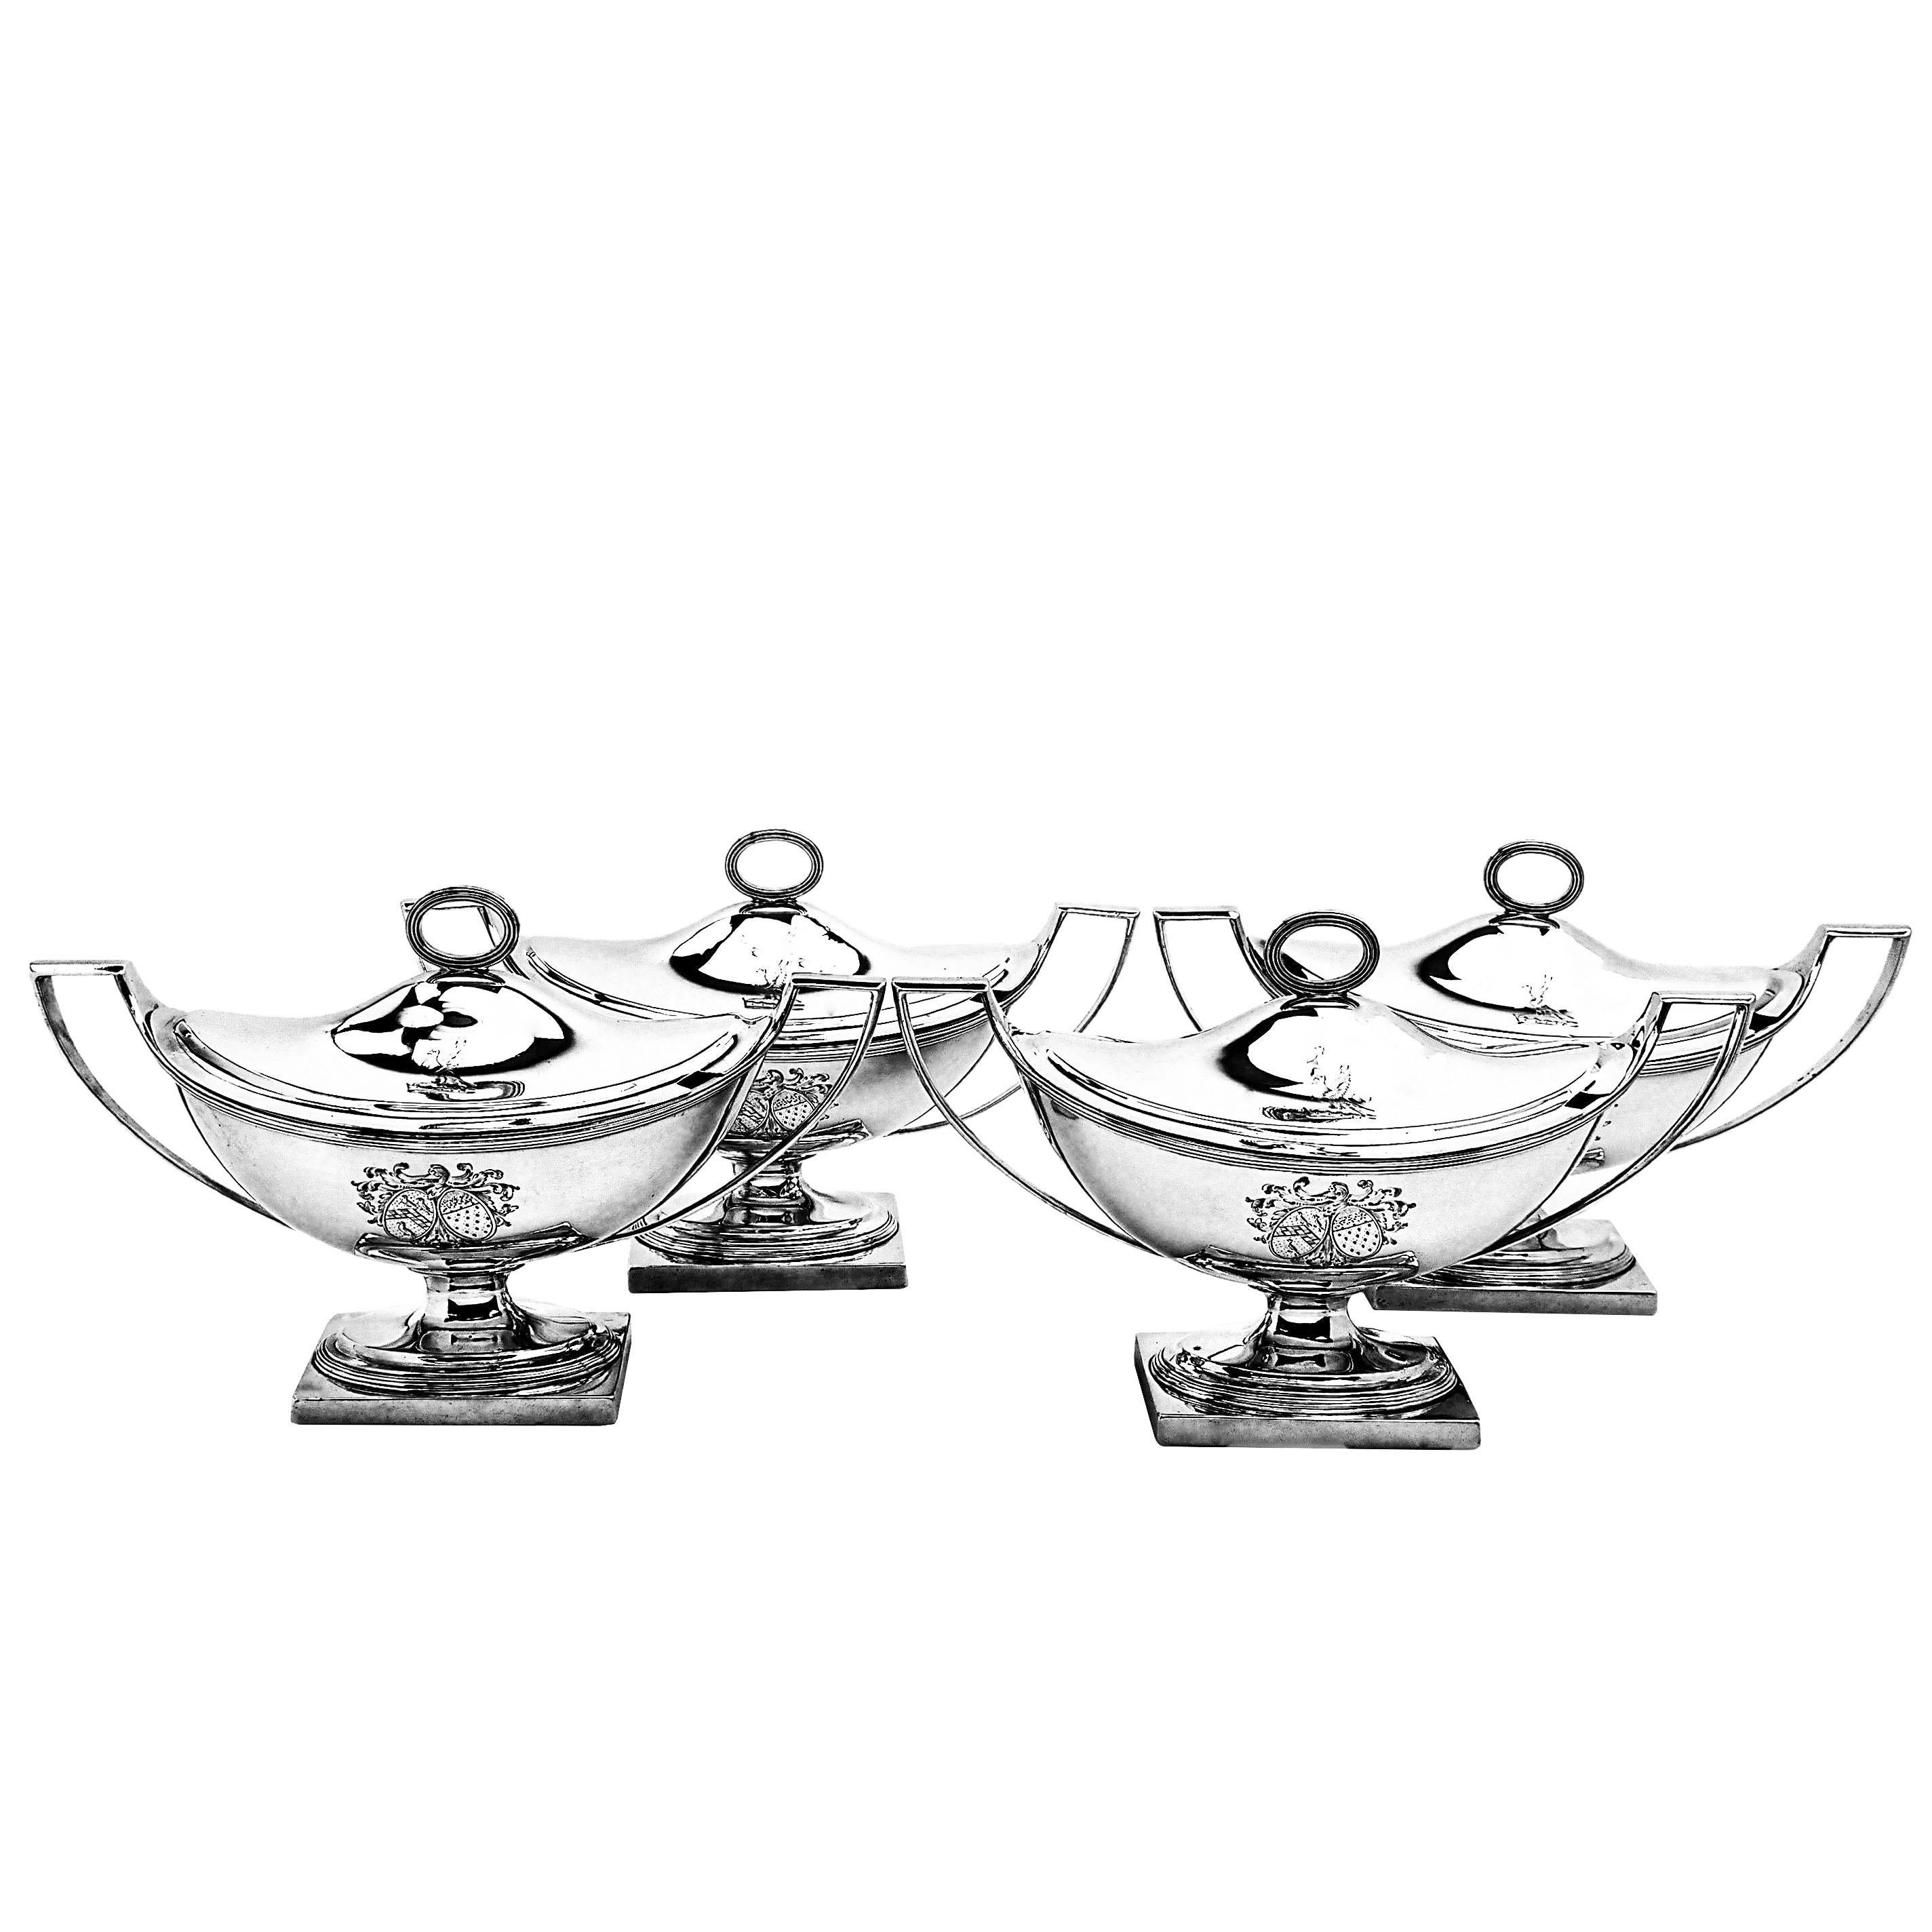 A set of four Antique George III solid Silver Sauce Tureens in a Classic oval form and standing on a square base. Each Tureen has a pair of impressive handles and the fitted domed lids have a reeded oval finial. Each Tureen has a large engraved